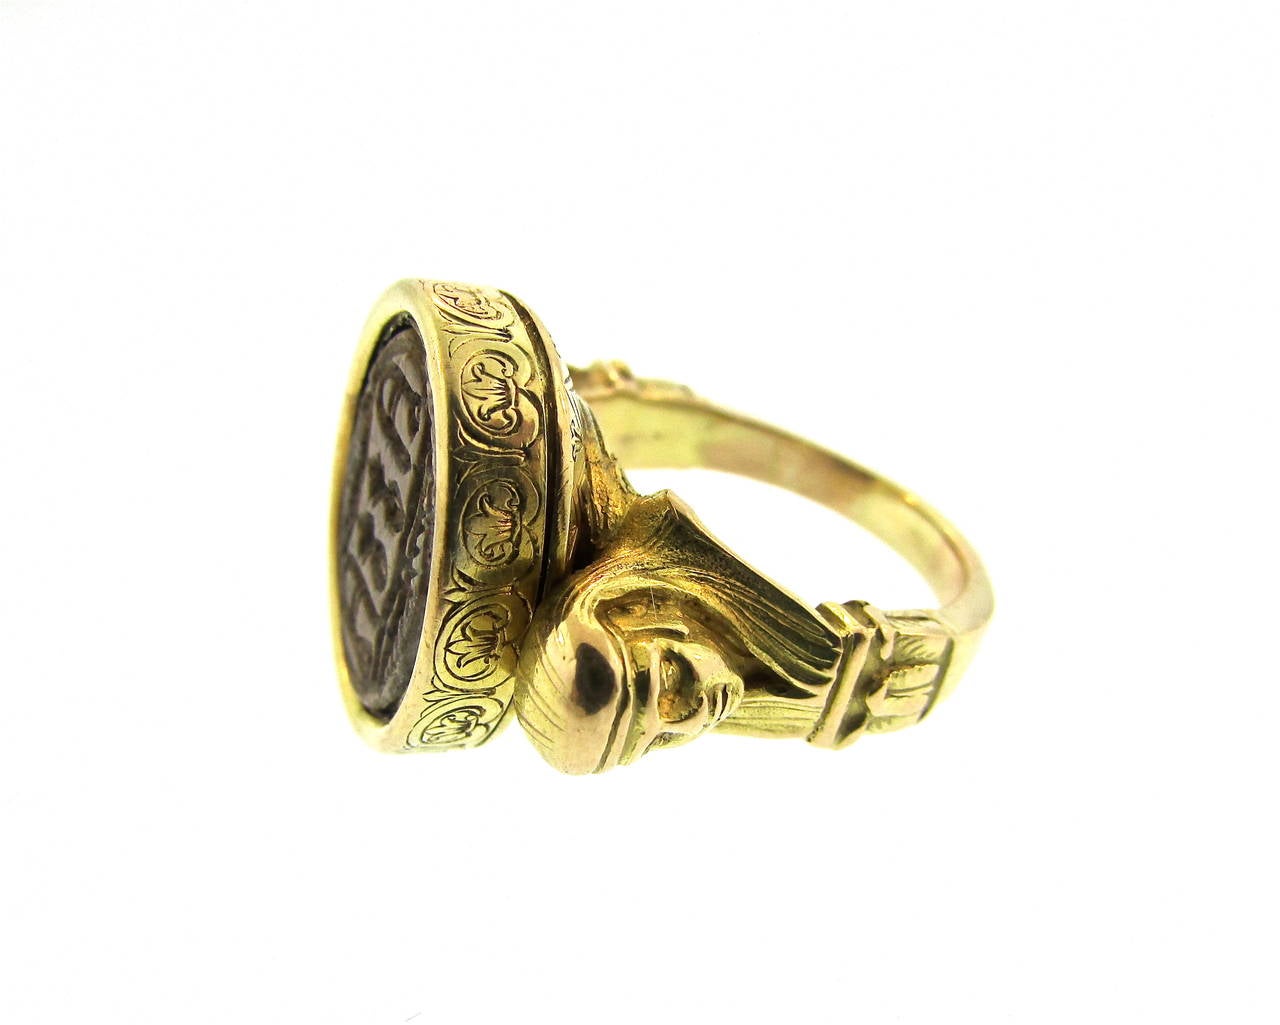 Victorian 18Kt Gold Ring set with Ancient Double-Faced Scarab 
English Setting C 1880
Ancient Egyptian Scarab